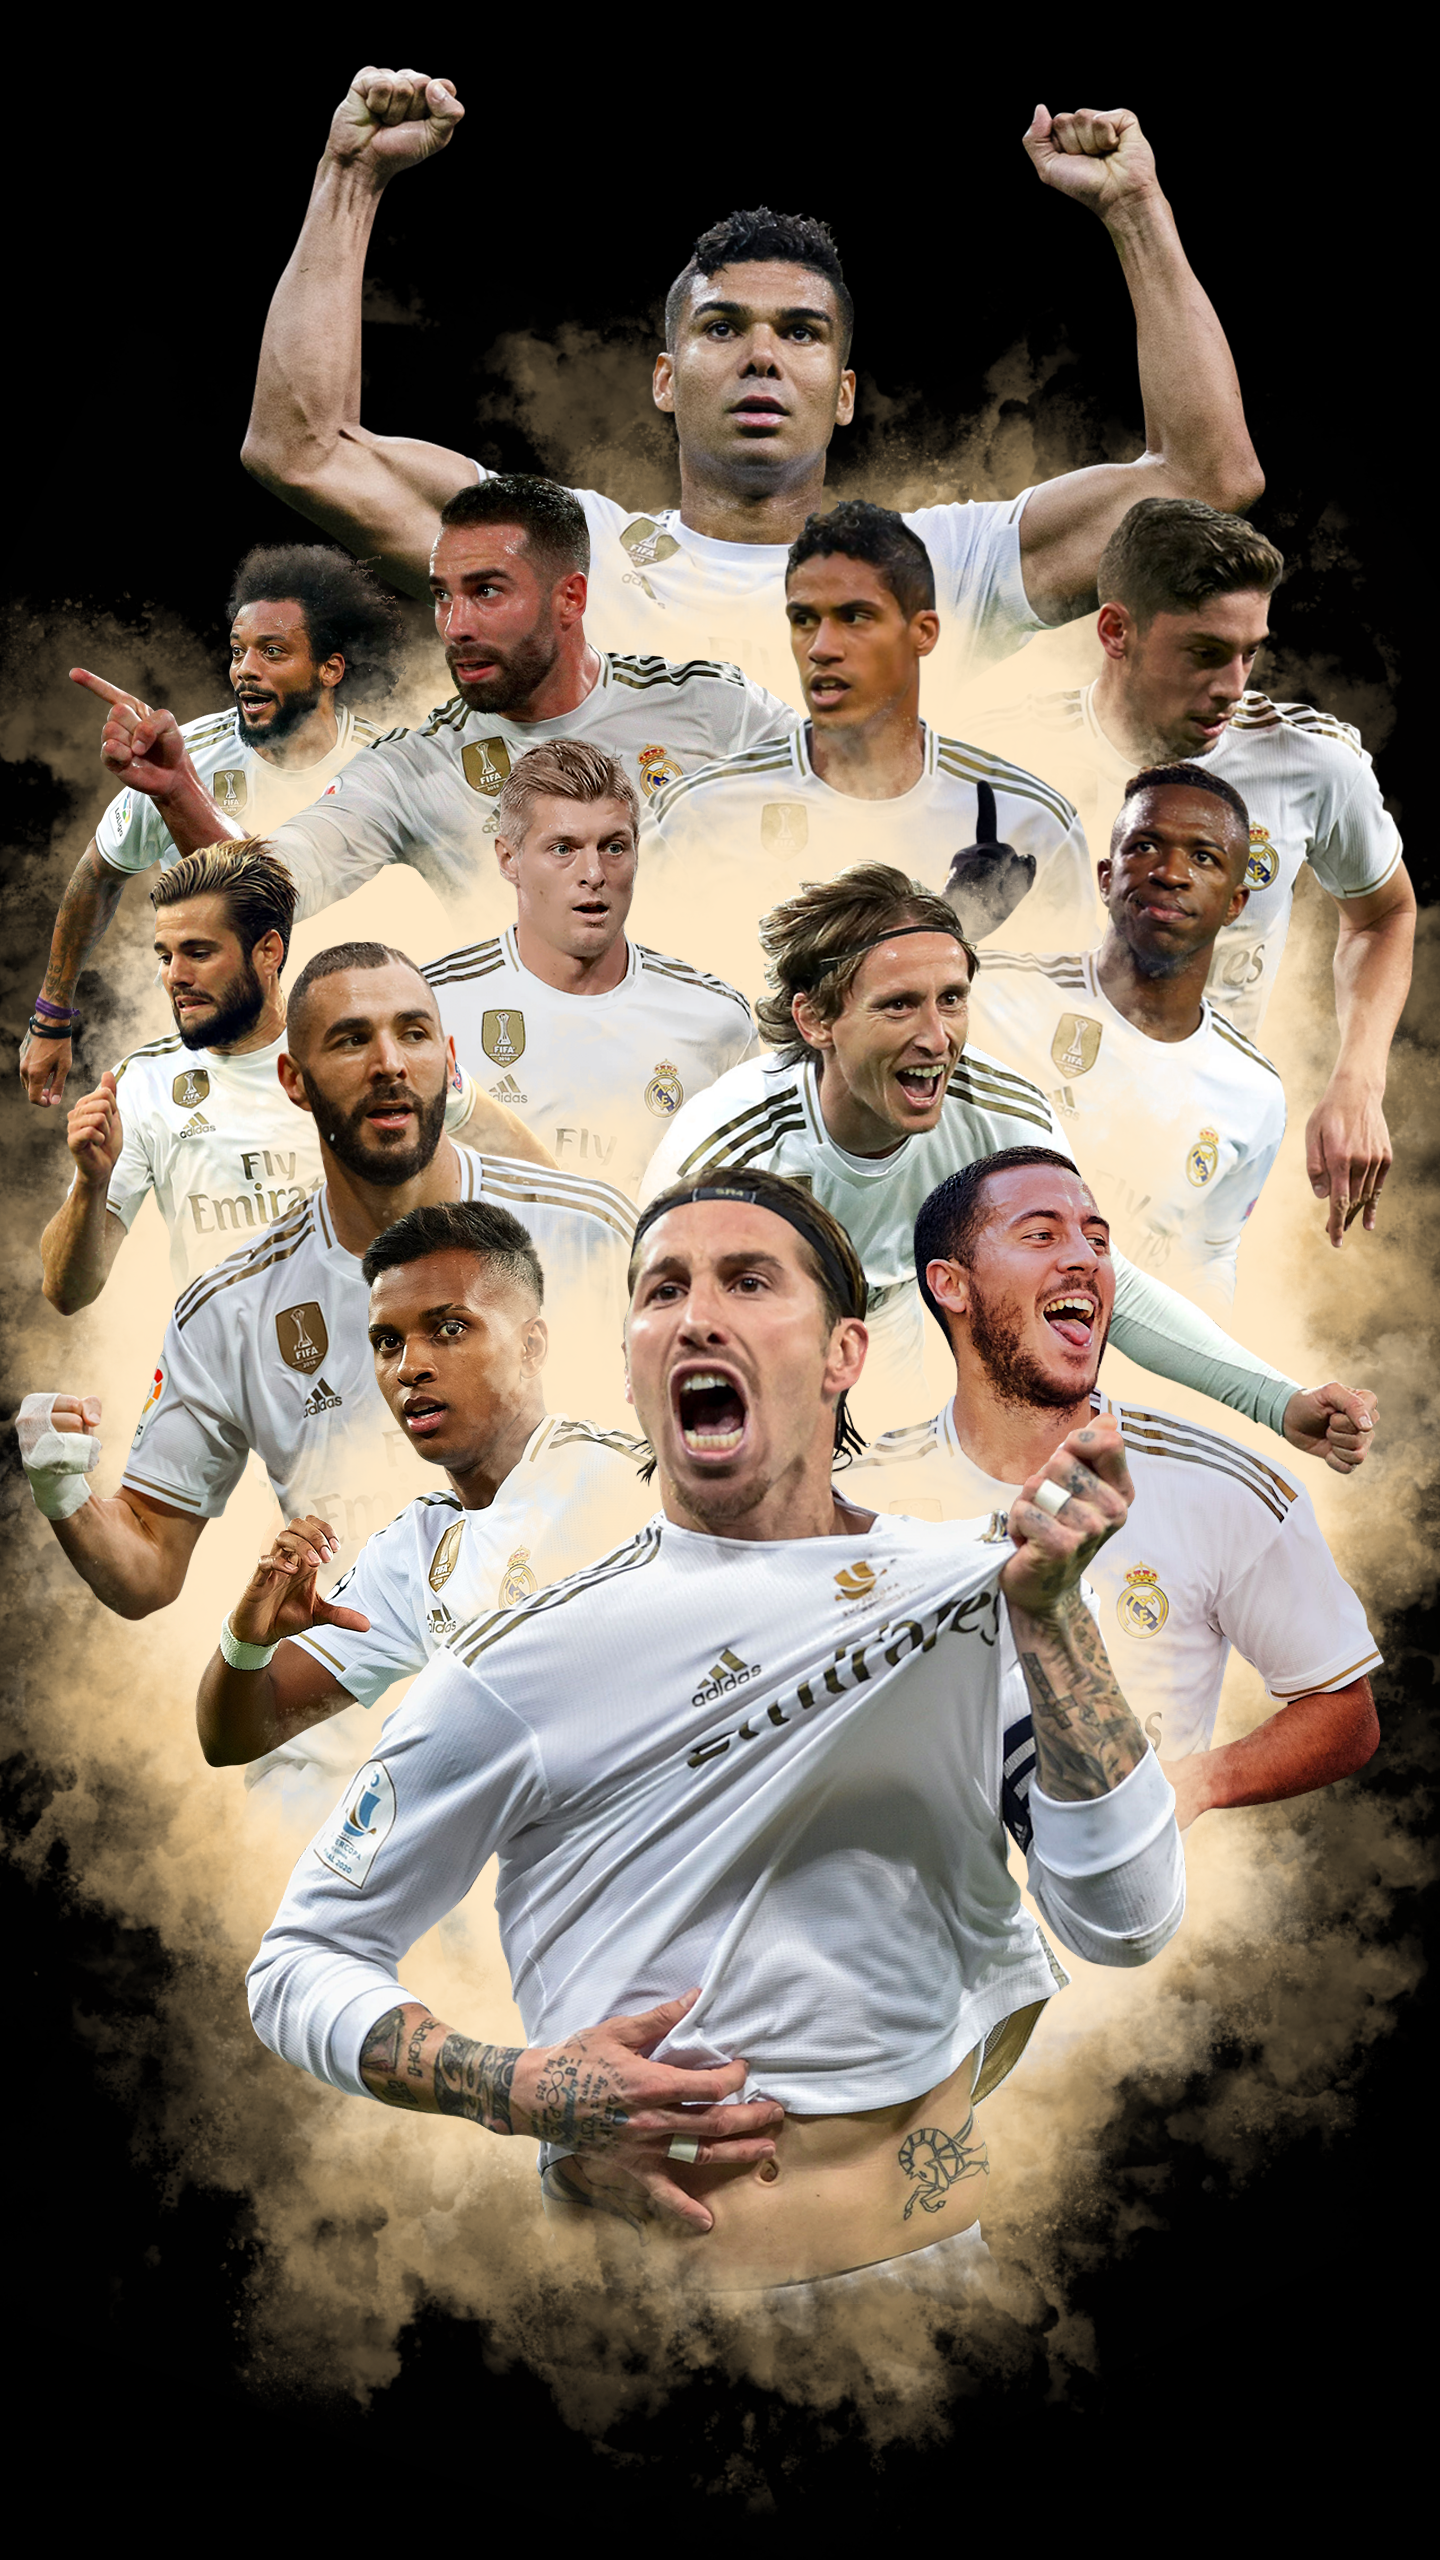 Real Madrid Team Wallpapers